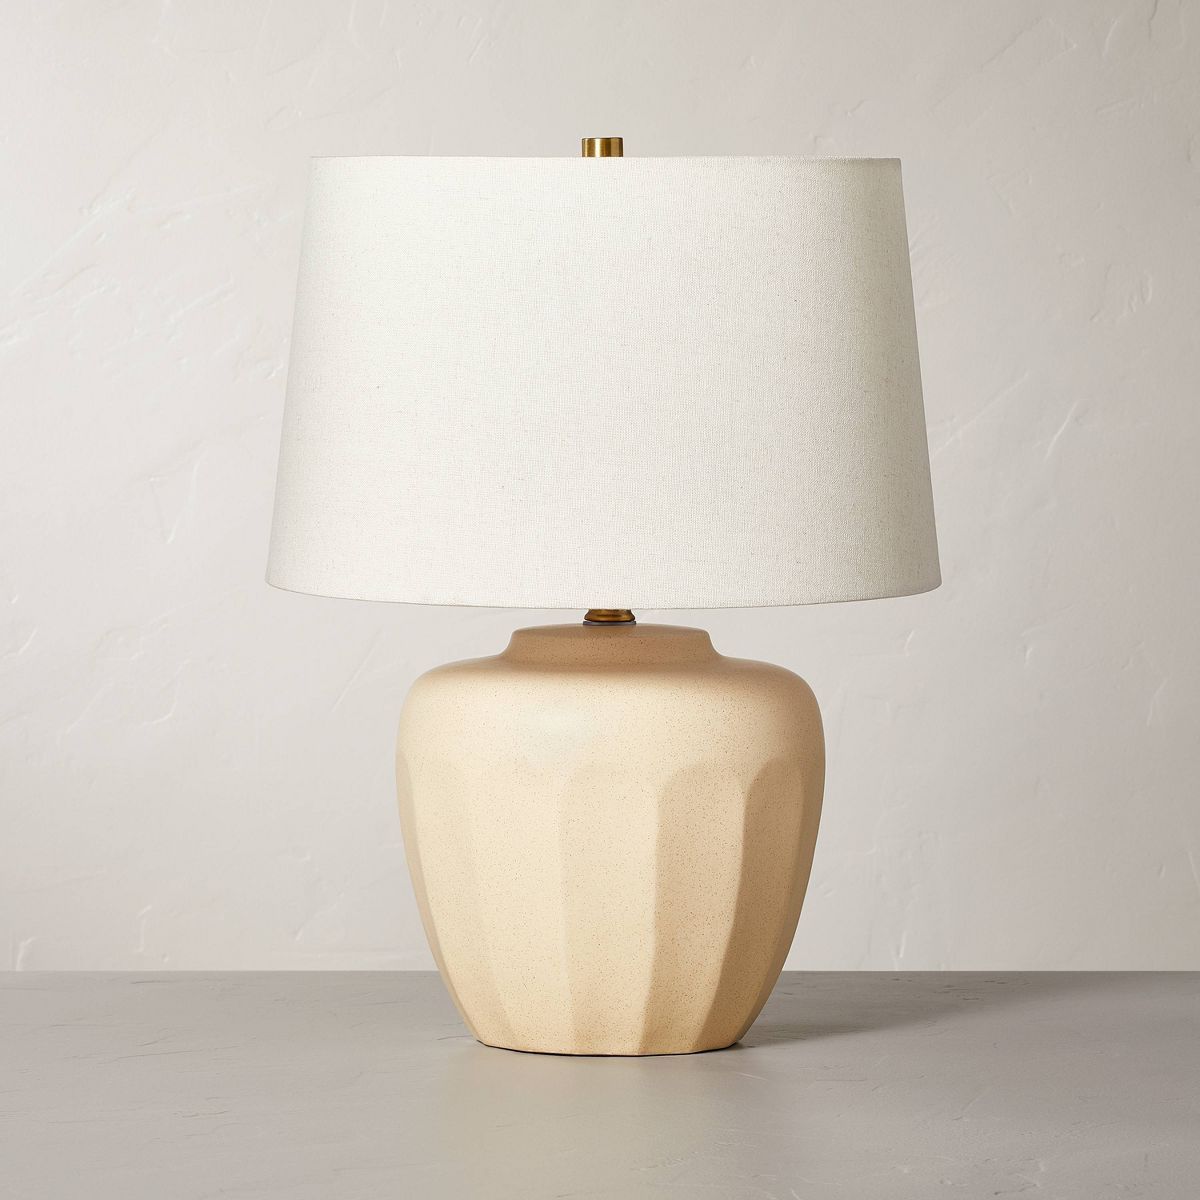 Faceted Ceramic Table Lamp Taupe/Cream (Includes LED Light Bulb) - Hearth & Hand™ with Magnolia | Target